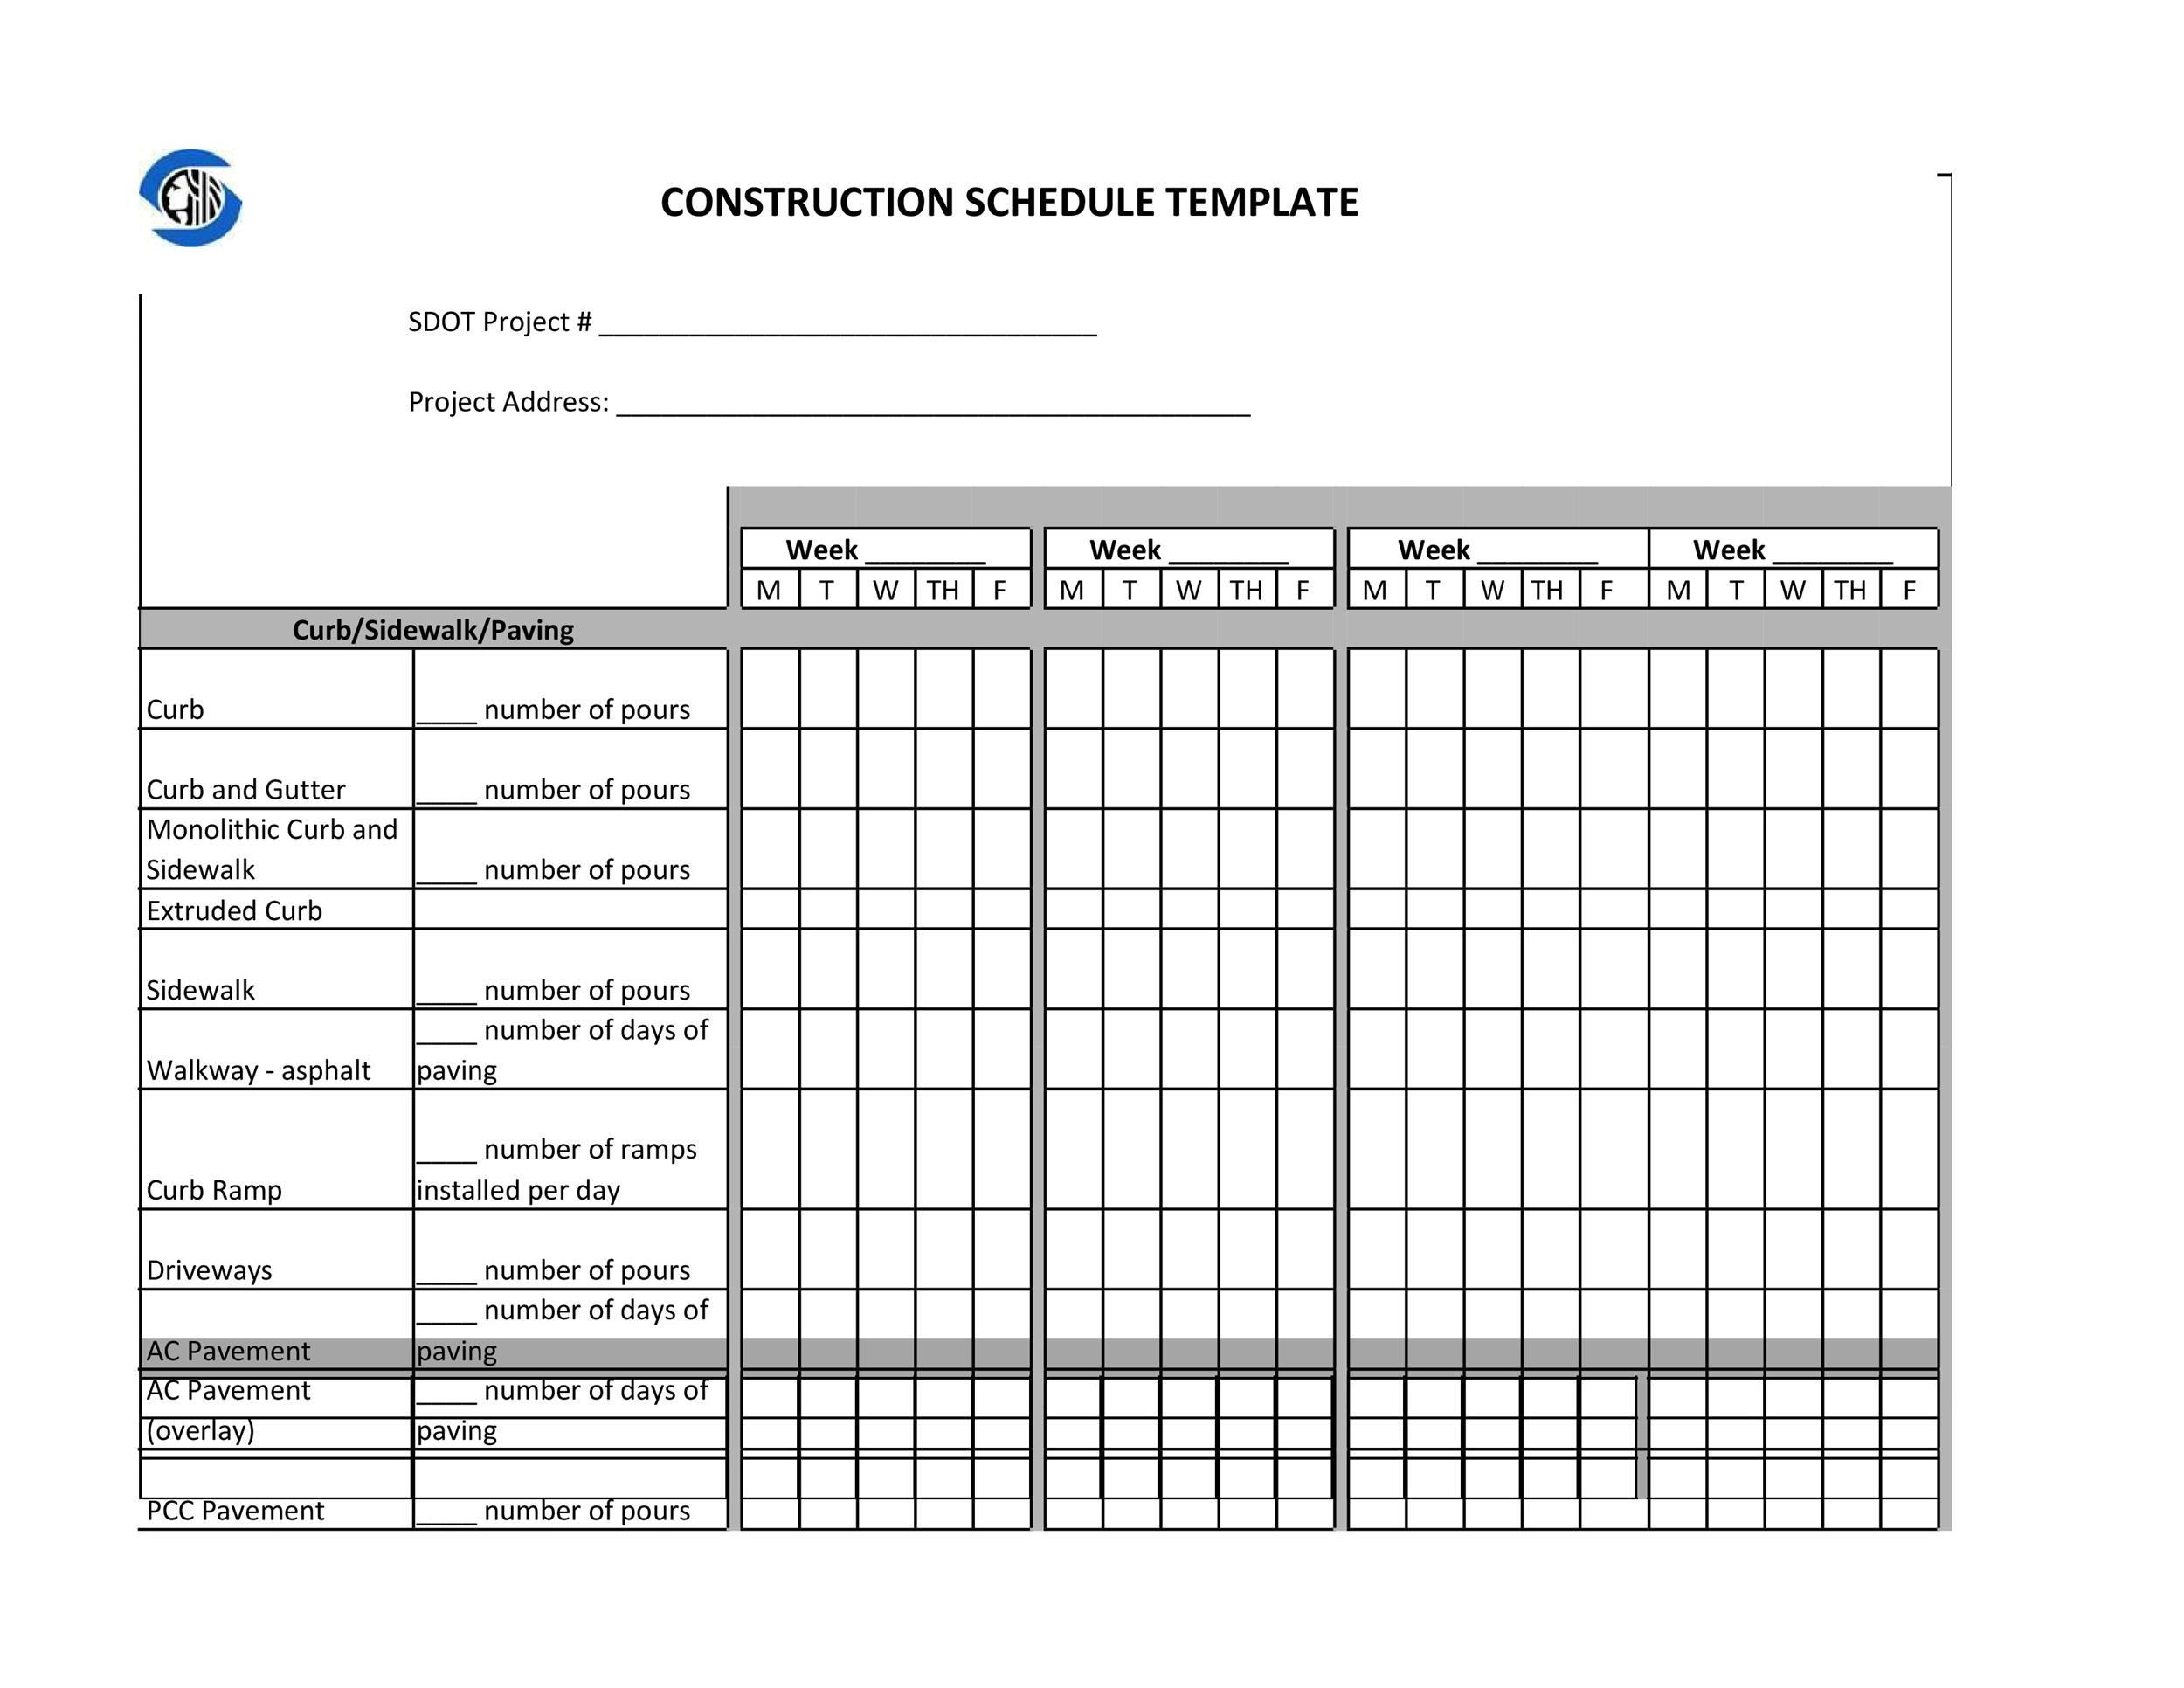 sample of printable commercial construction schedule template in excel format